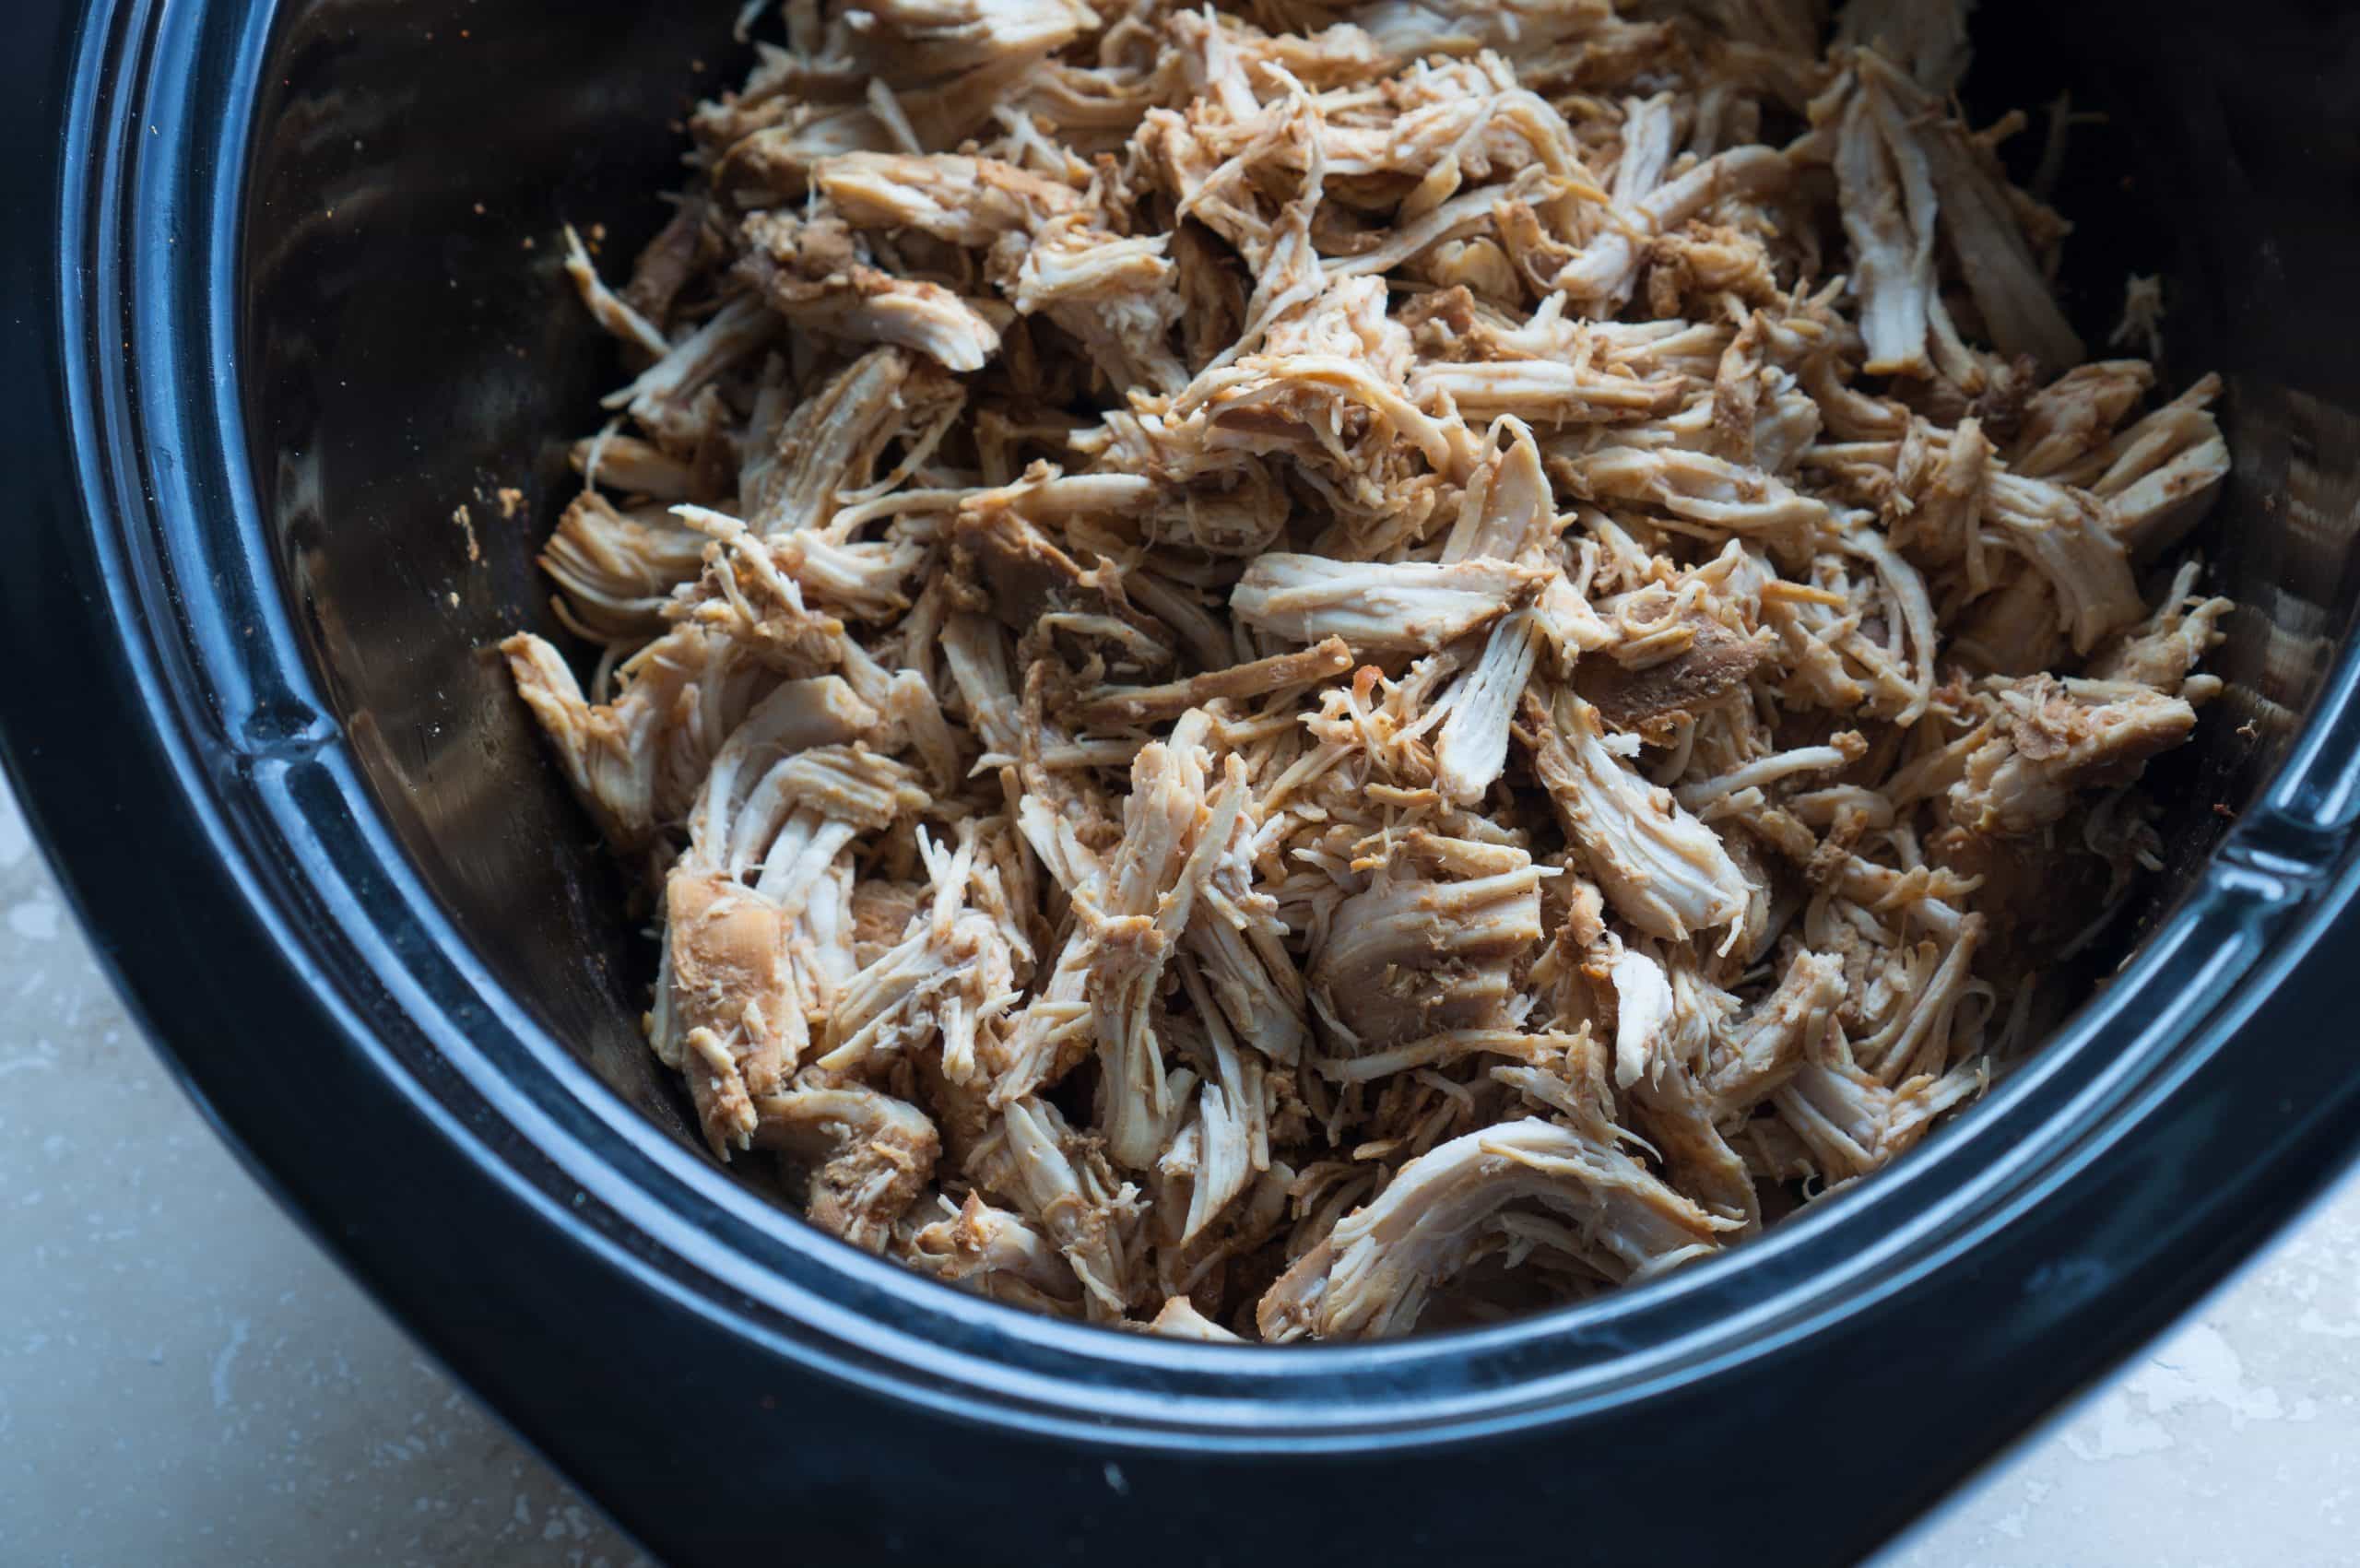 Easy Crockpot Pulled Chicken - This gluten-free recipe for Easy Crockpot Pulled Chicken is easy eats! Lean, protein-packed chicken breasts are made in the slow cooker with apple cider vinegar, tomato sauce, Worcestershire sauce, molasses, and smoked paprika. We love using this tender shredded chicken in enchiladas, tacos, lettuce wraps, sandwiches, and salads ♥ | freeyourfork.com